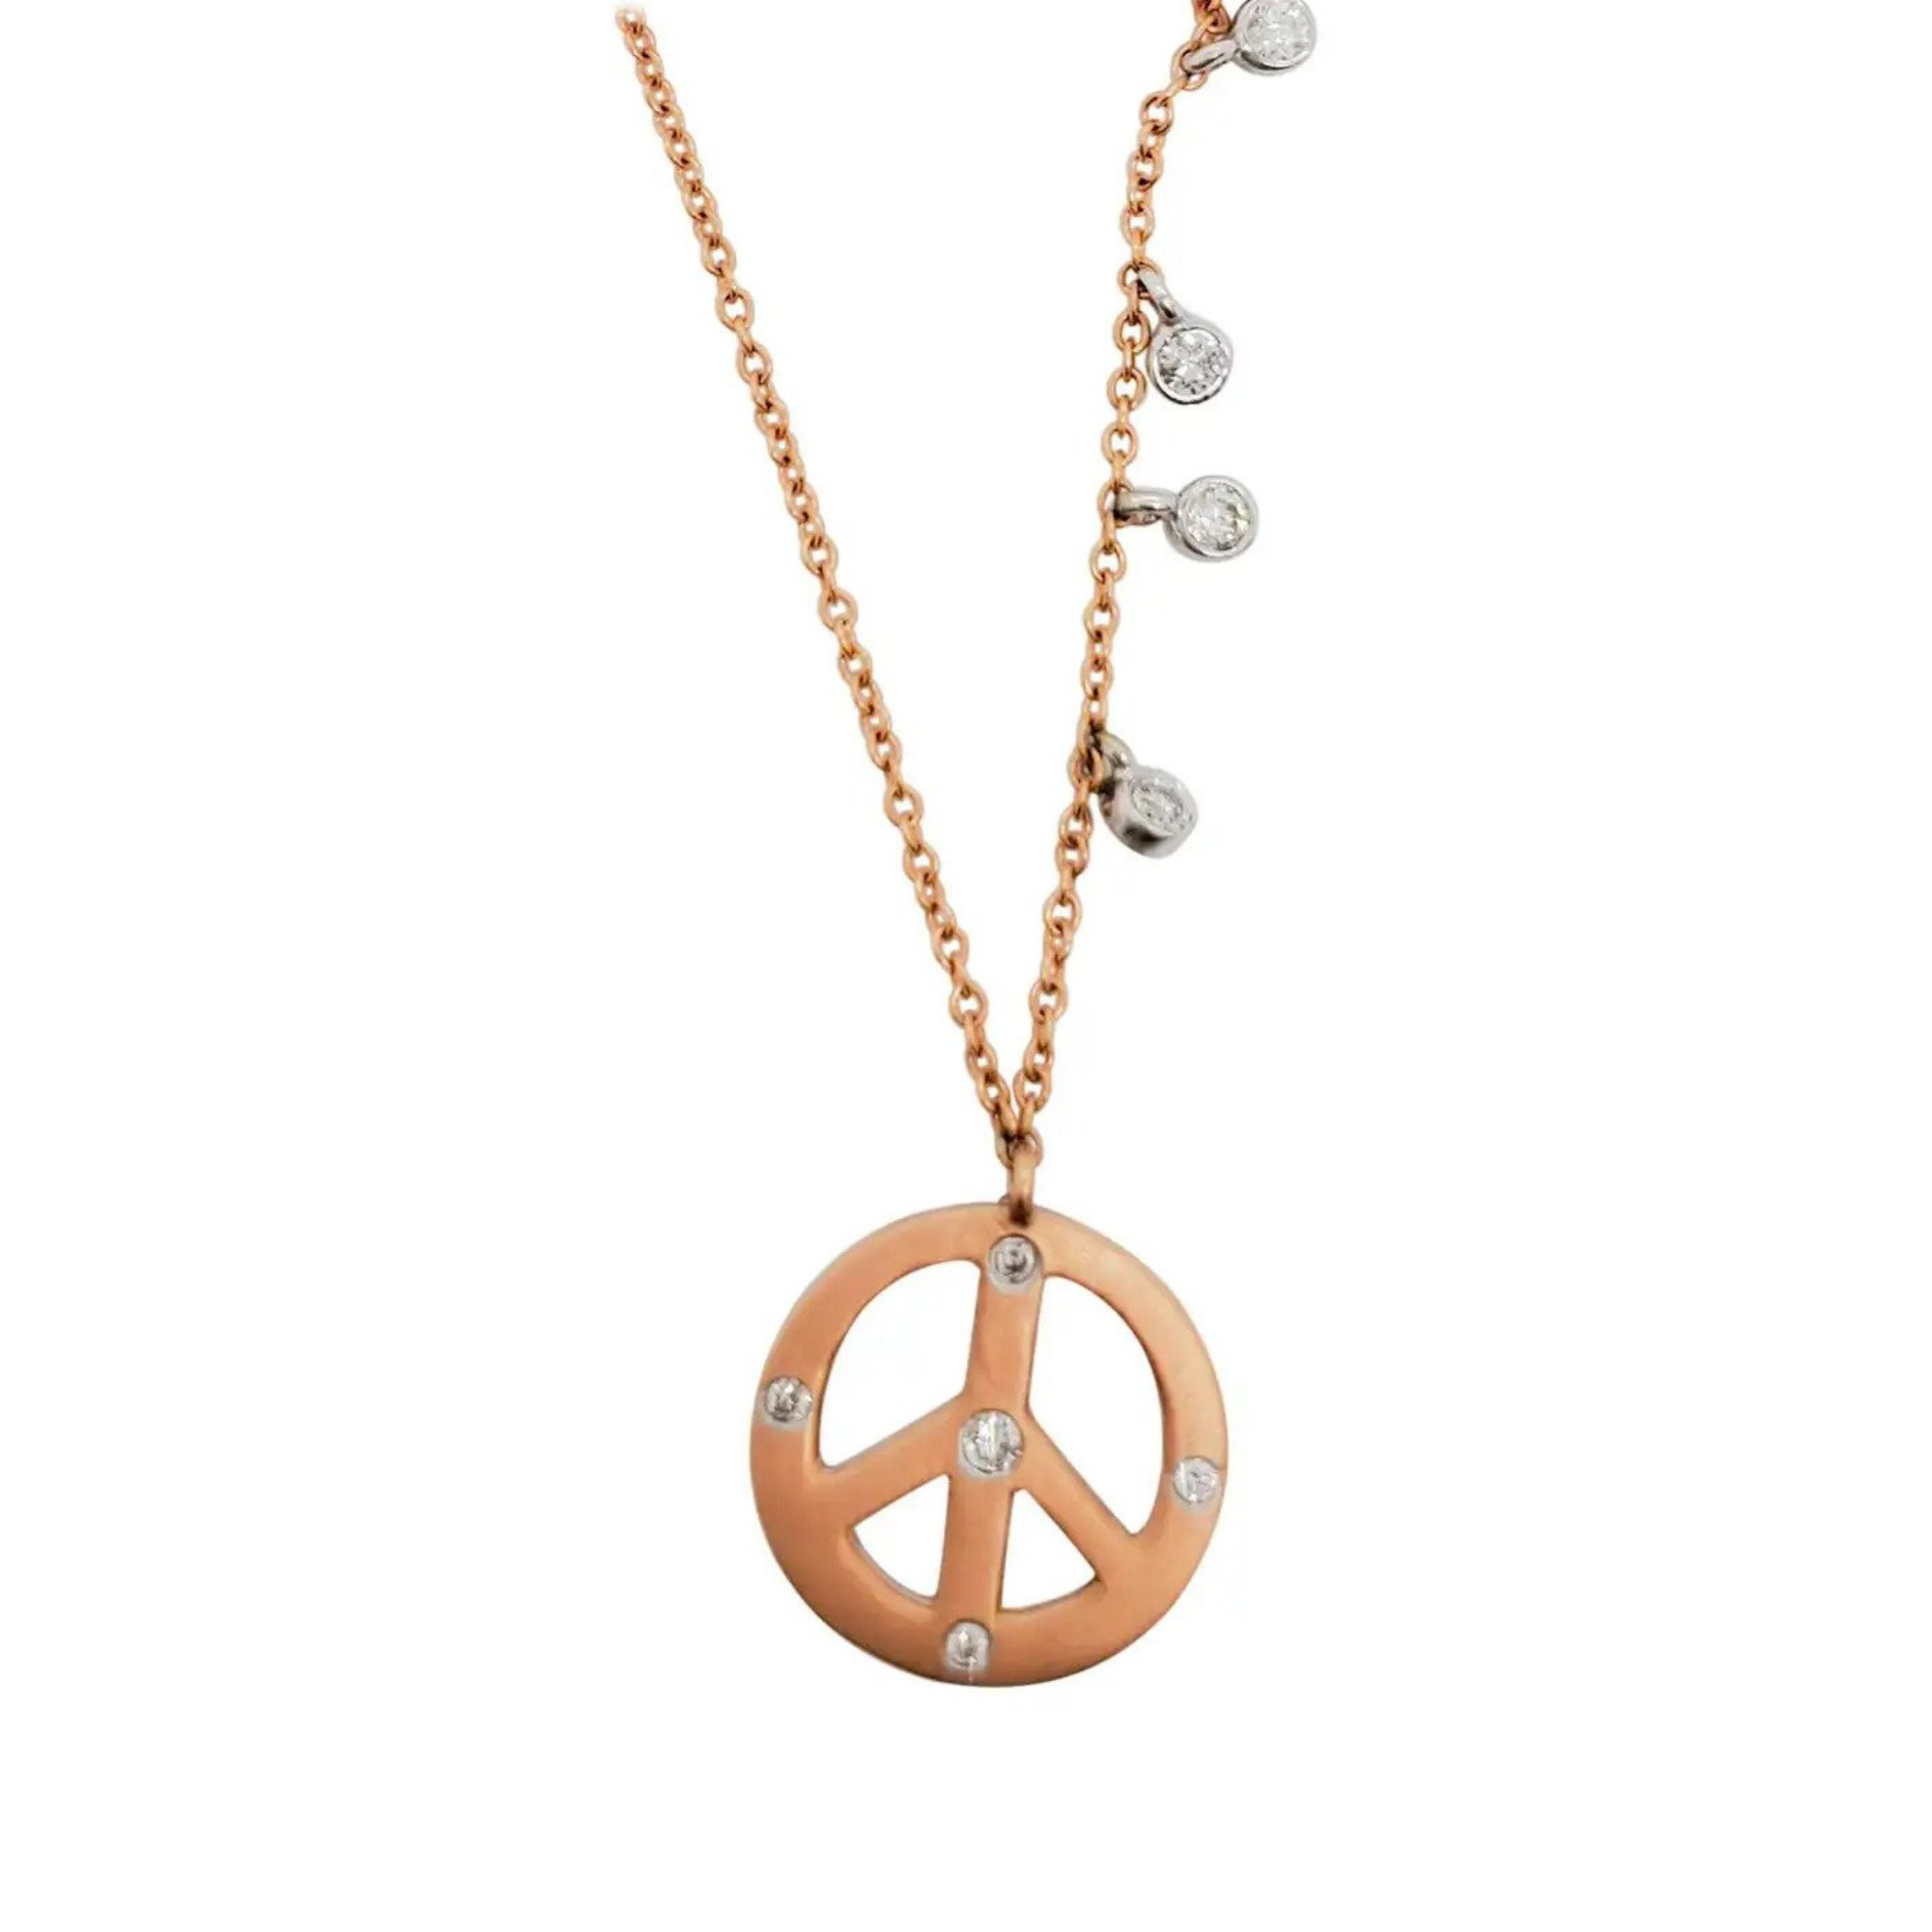 Estate Peace Sign Diamond Pendant Necklace in 14k Rose and White Gold, $1,050 (originally $1,400) 